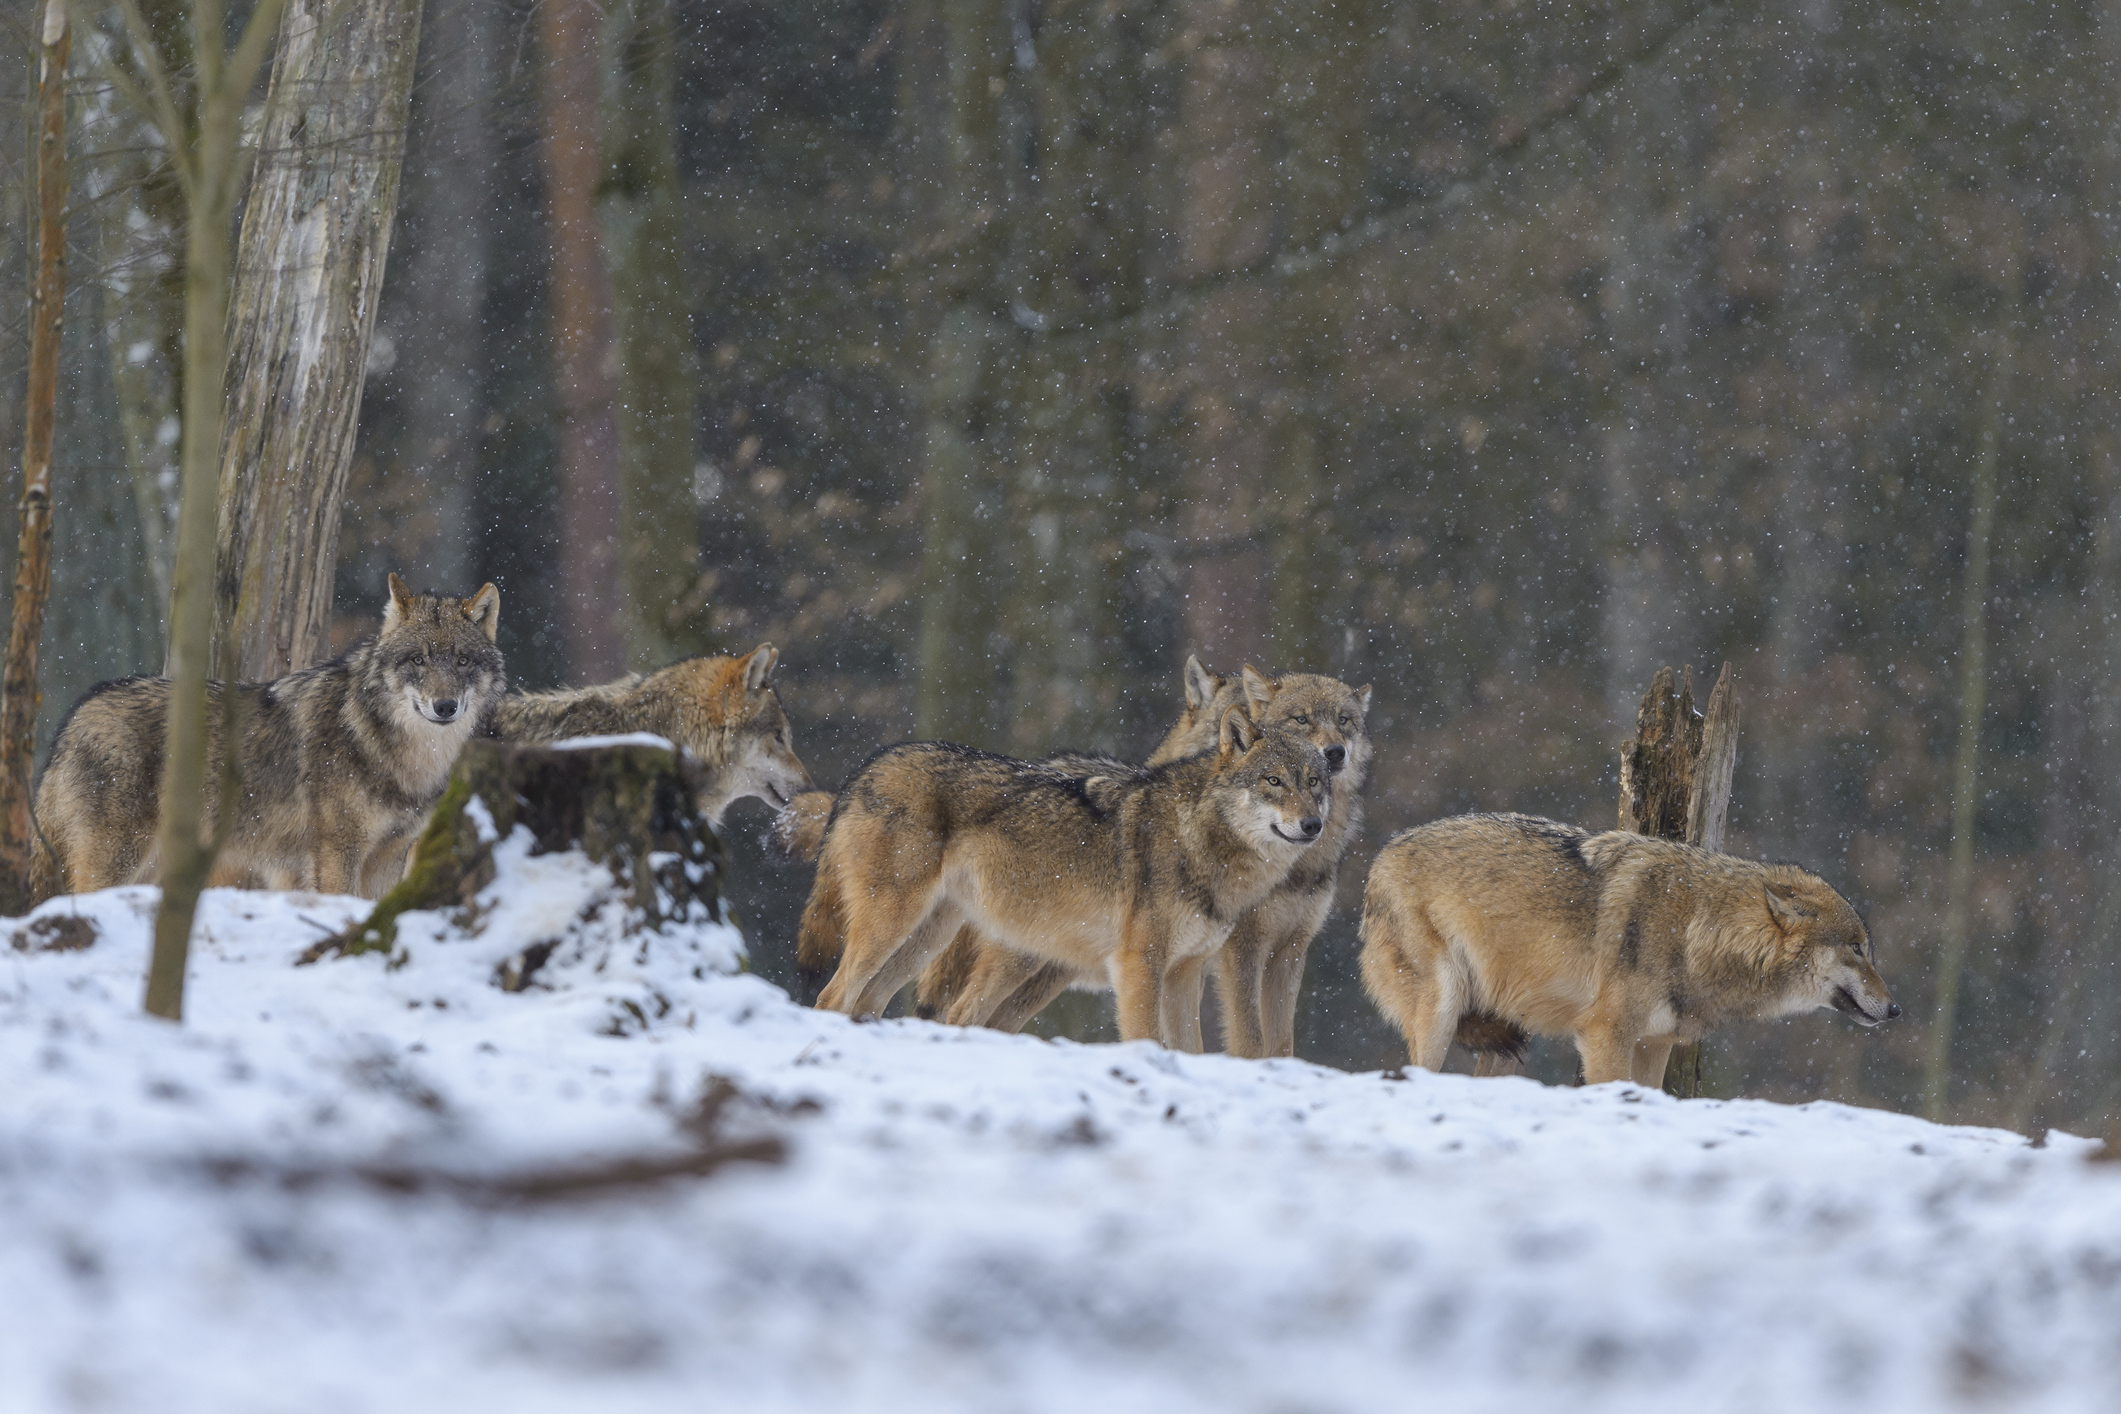 After EU President’s Pony Is Killed by a Wolf, Europe Considers Easing Protections for Wolves